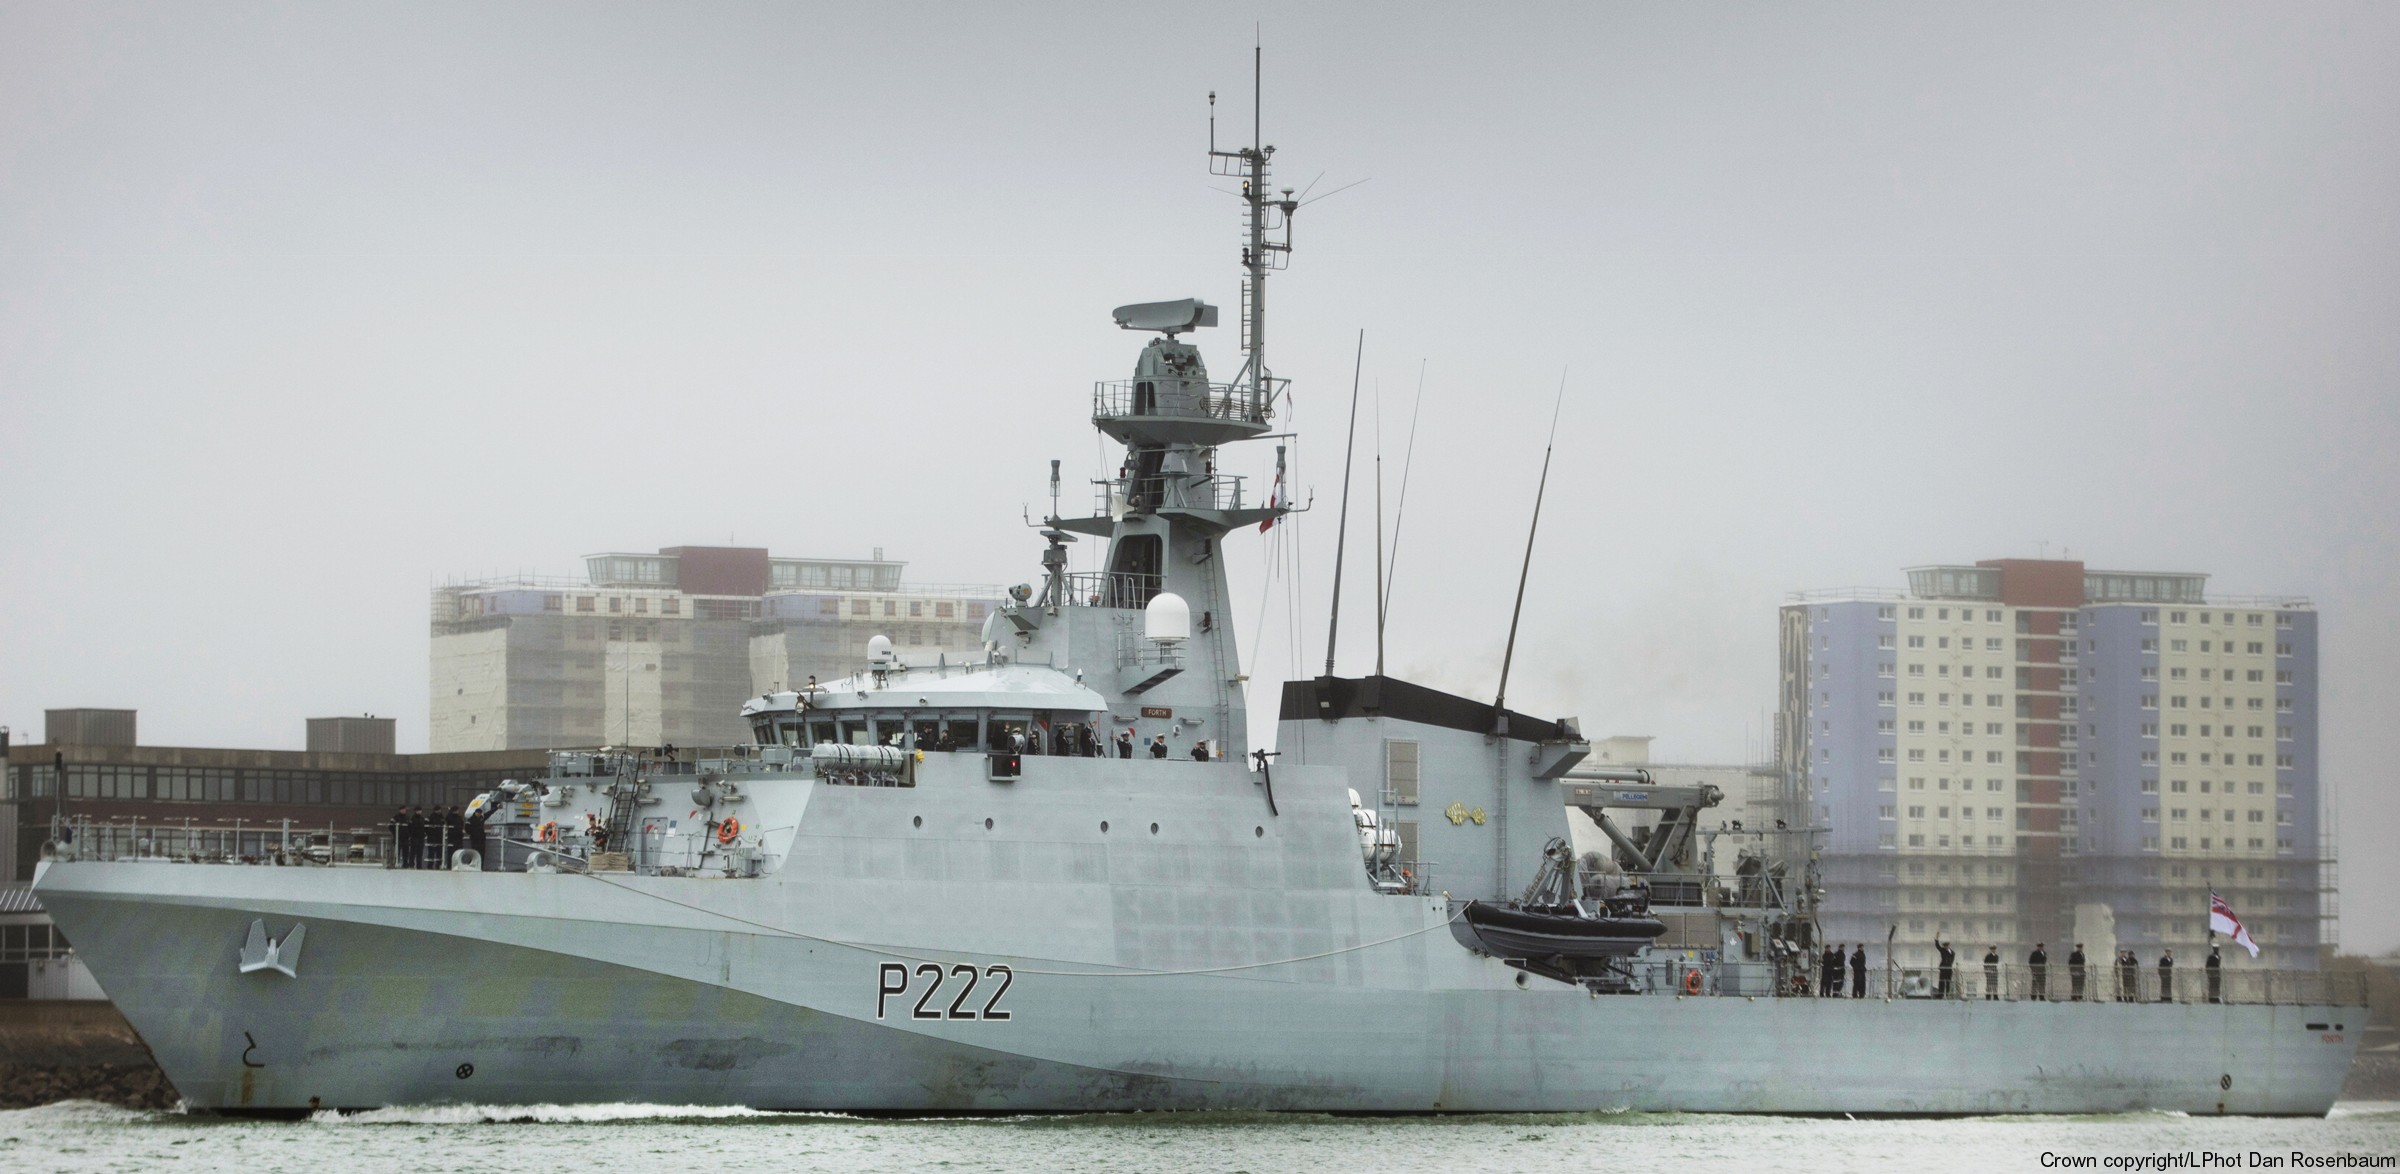 p222 hms forth river class offshore patrol vessel opv royal navy 15